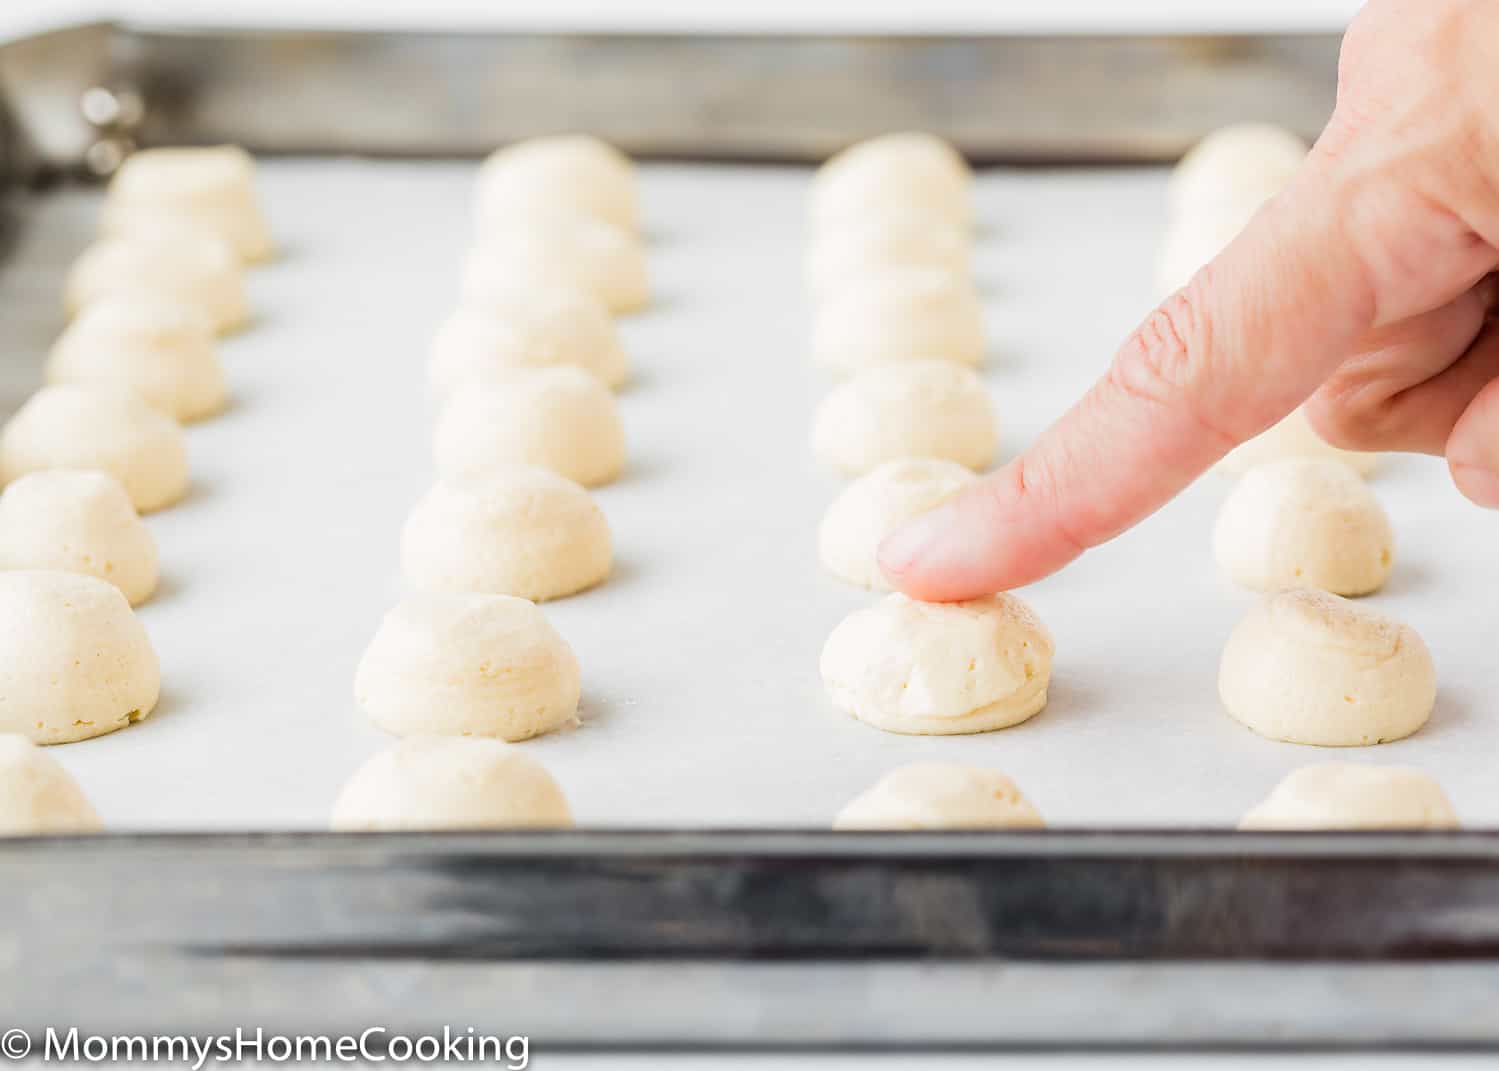 a finger smoothing the tops of Eggless Vanilla Wafers dough scoop out in a baking tray.